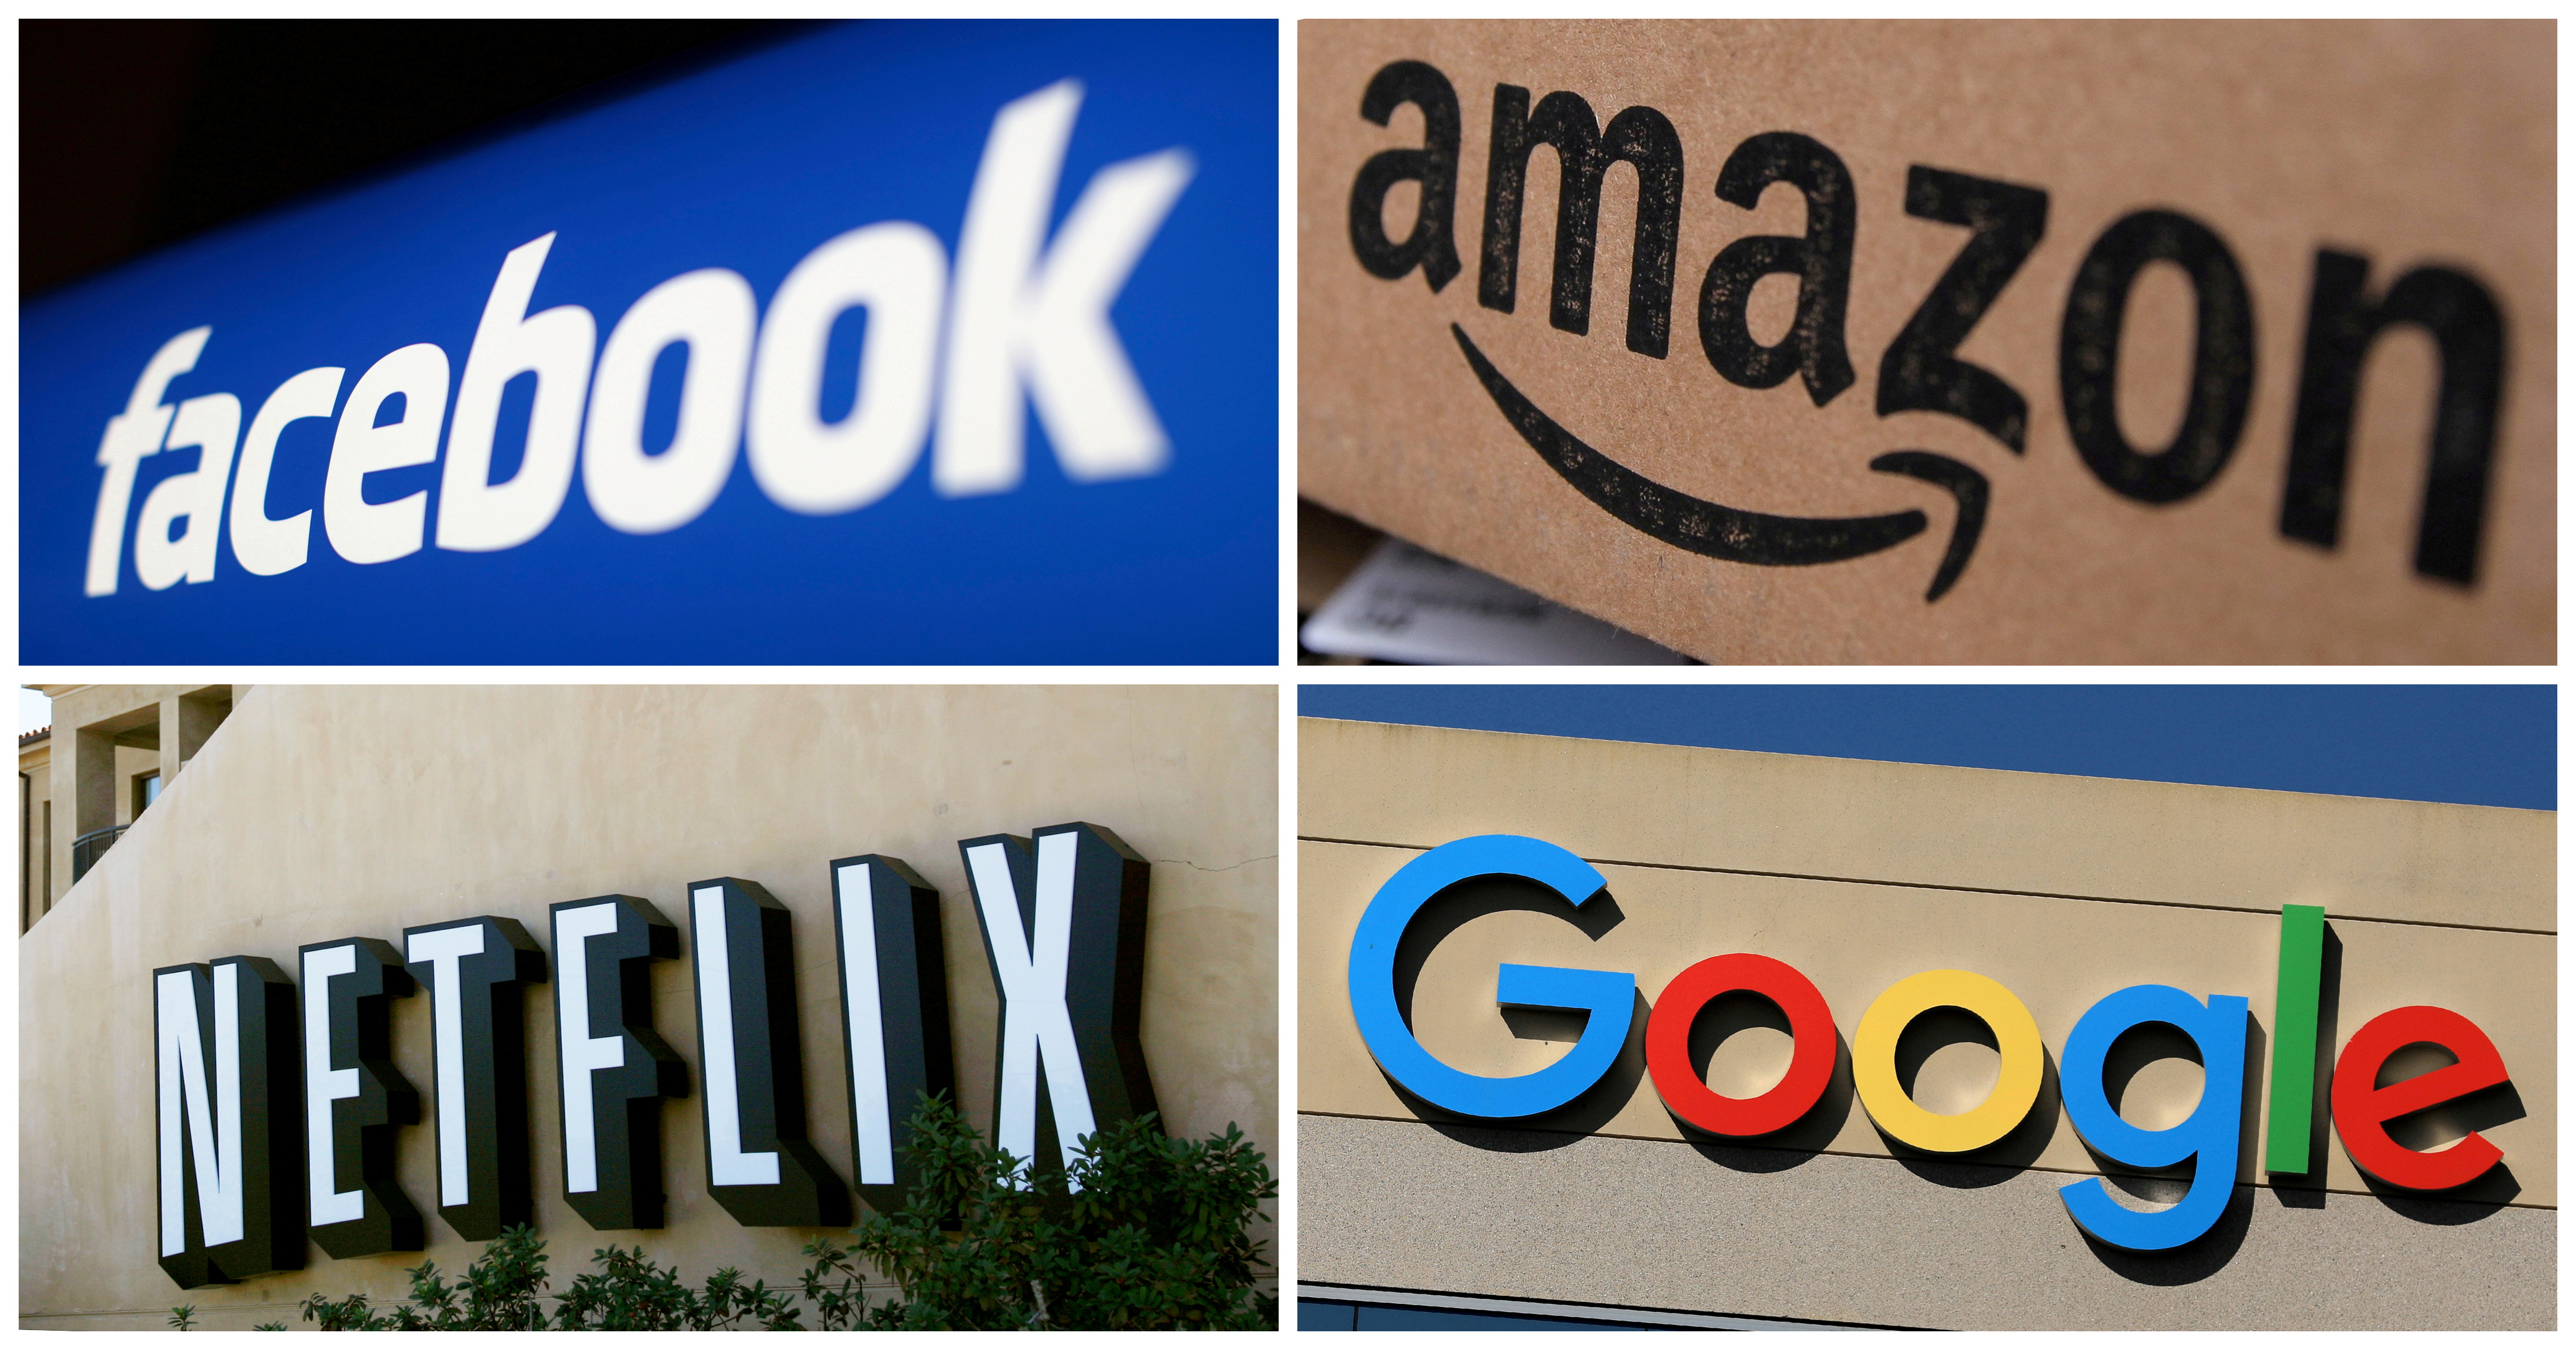 Facebook Amazon Netflix and Google logos in combination photo from Reuters files